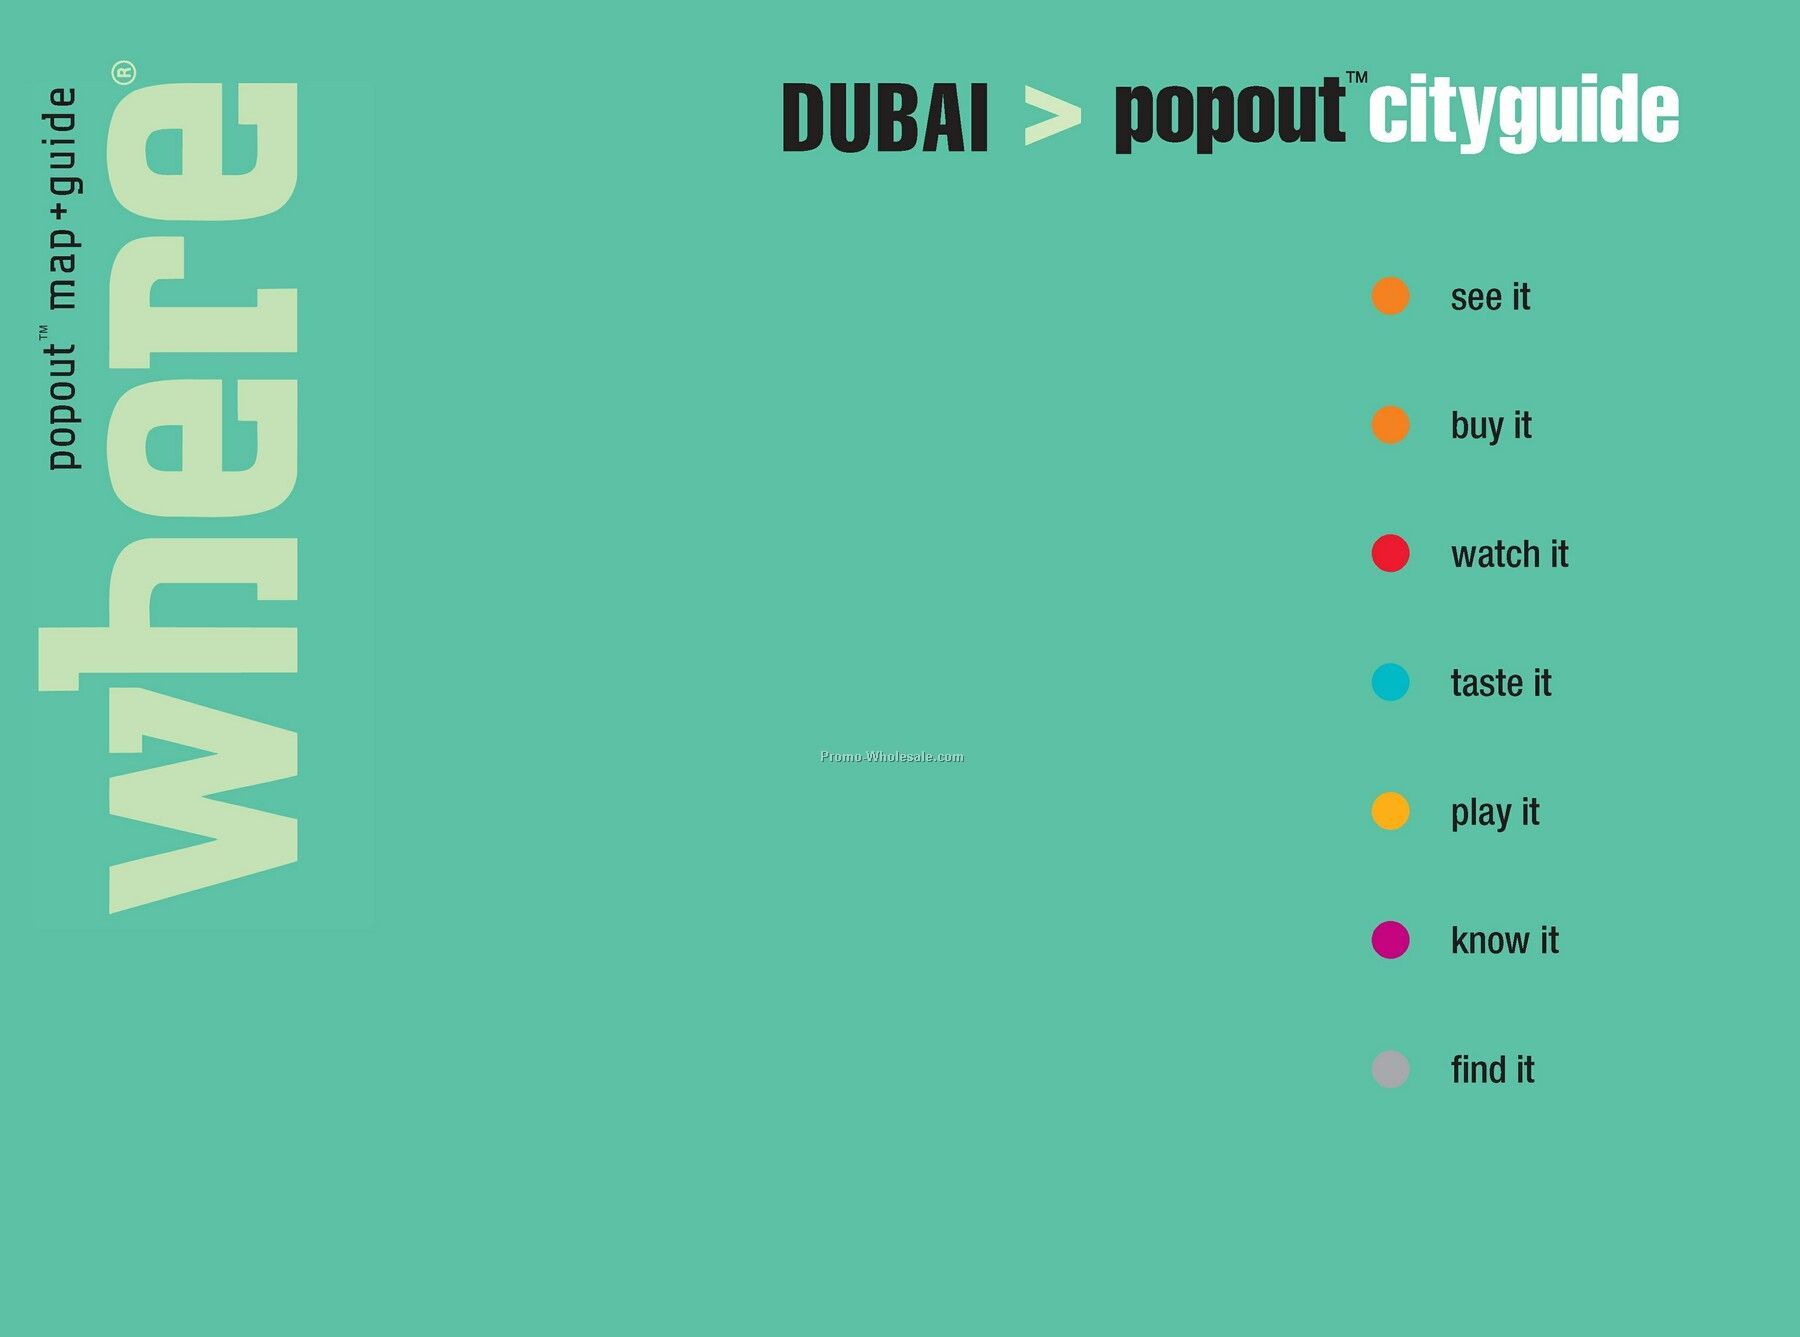 Travel Guides - International City Guide Of Dubai - Featuring Popout Maps